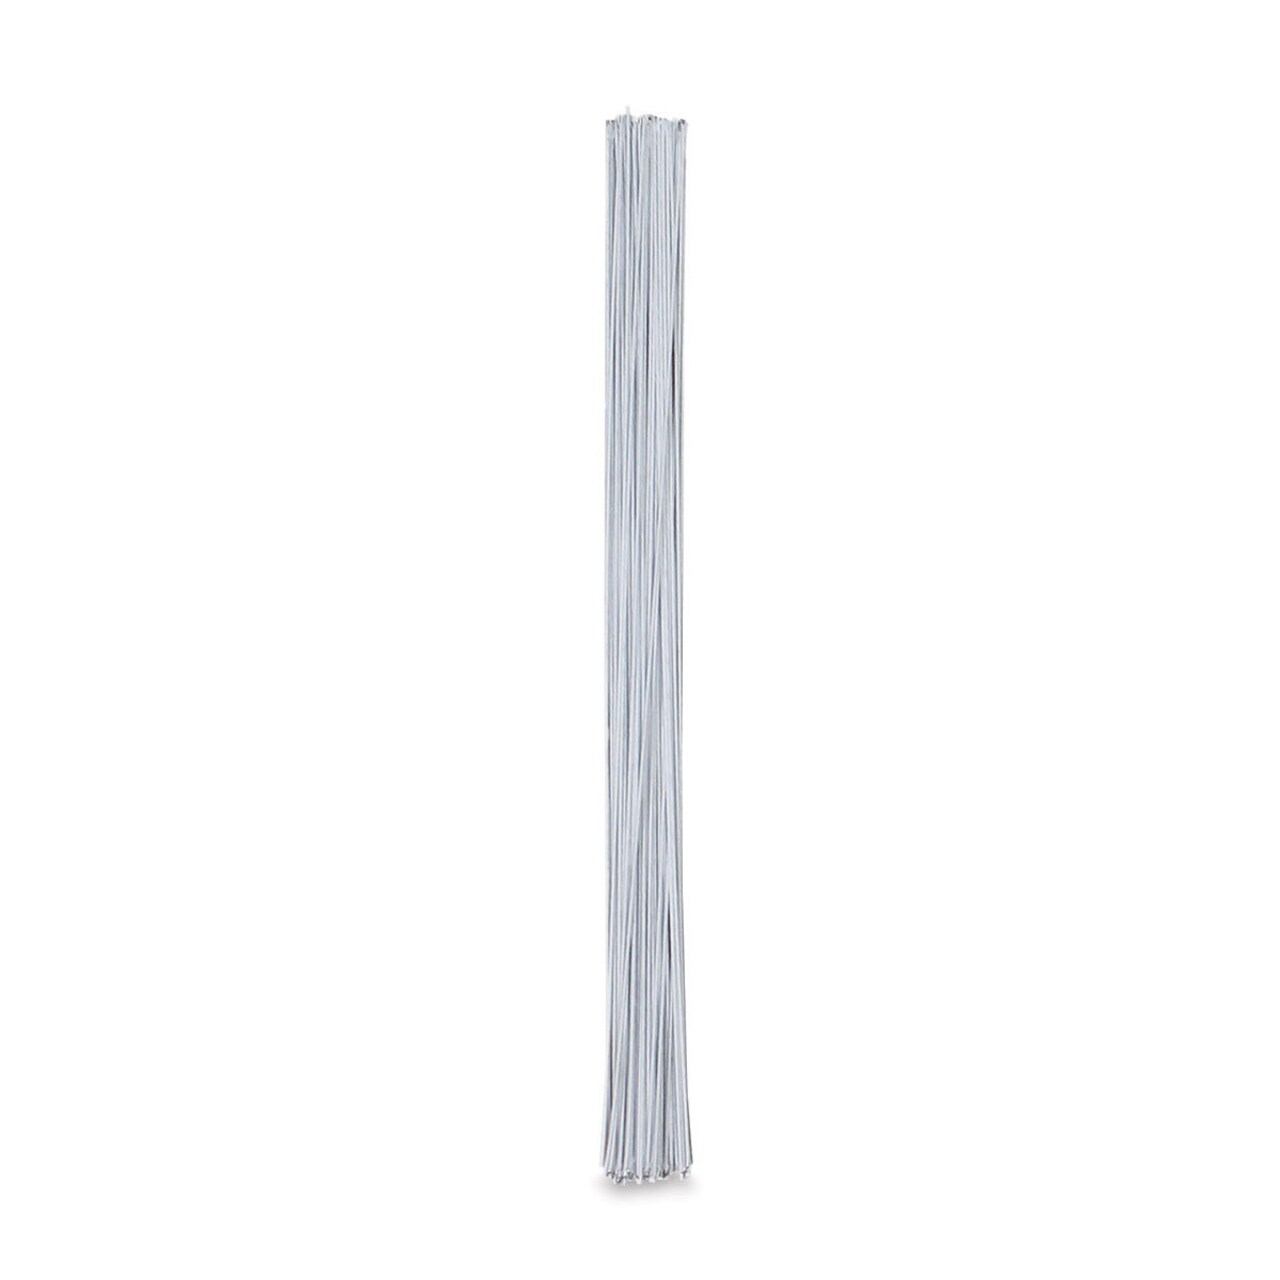 CakeDeco Floral Wire - White, Pkg of 50, 18 gauge, 14 long